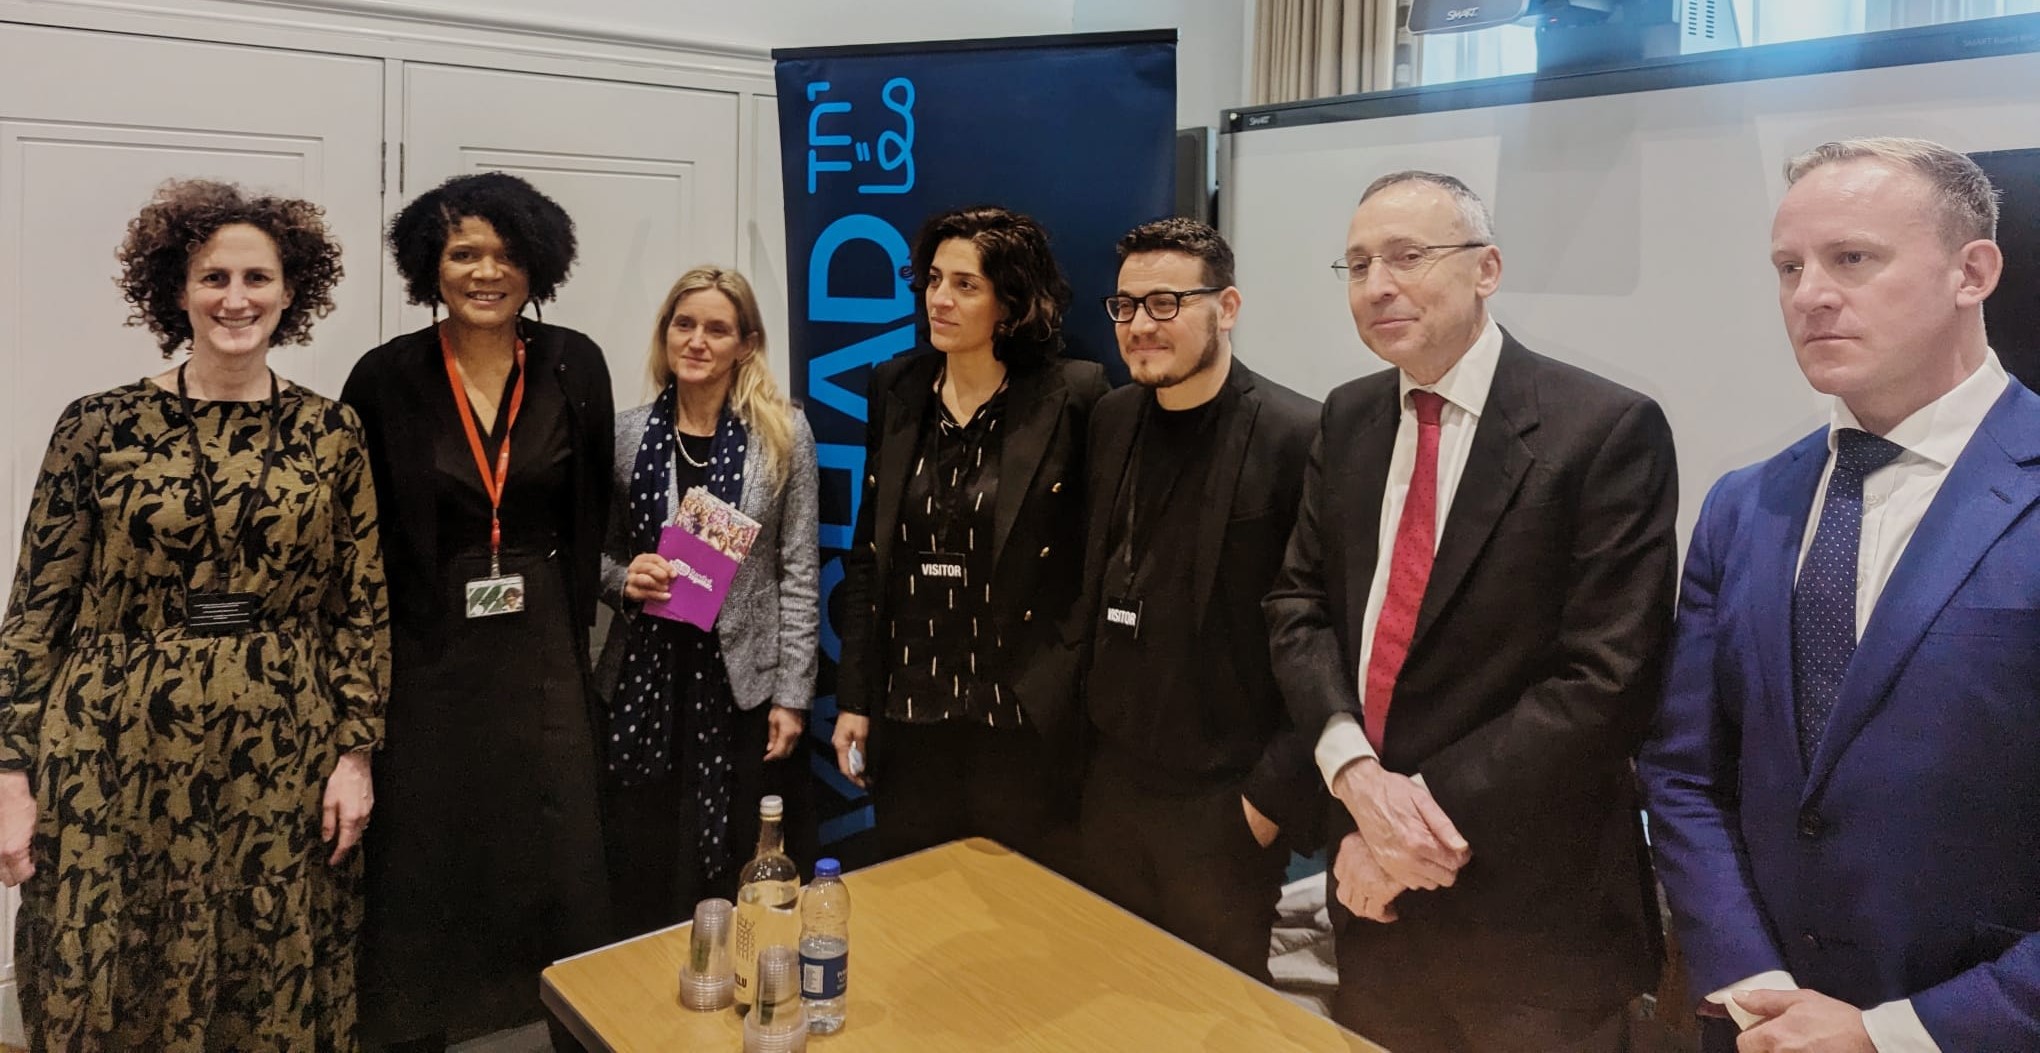 Great to meet Standing Together UK who mobilise Israel’s Jewish & Palestinian grassroots to pursue peace & social justice.